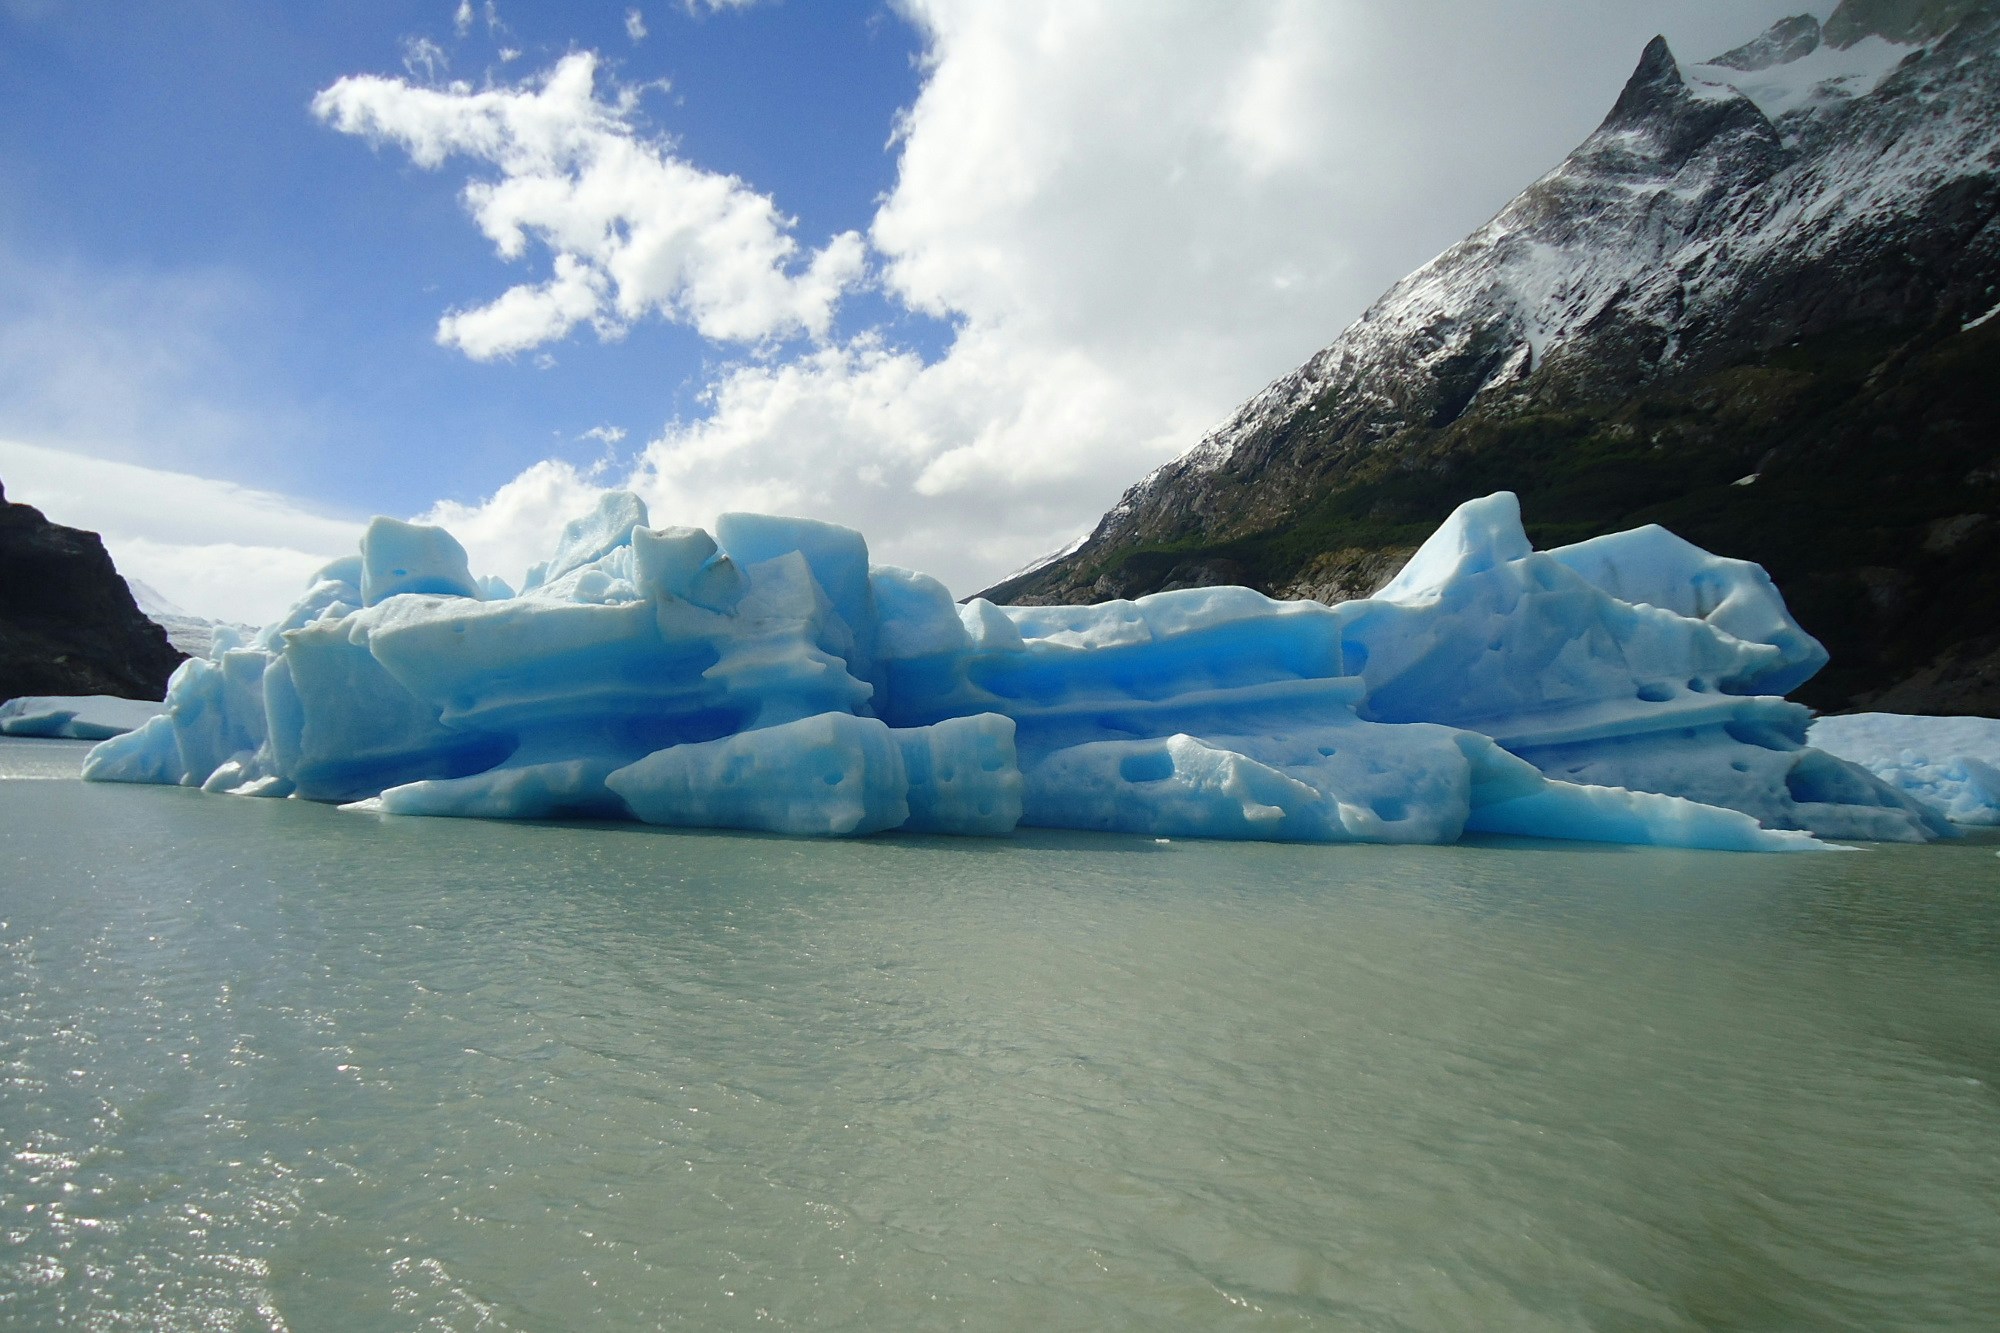 Exploring less-visited places like the ice fields of Patagonia helps reconnect people with nature © Kalyan Panja